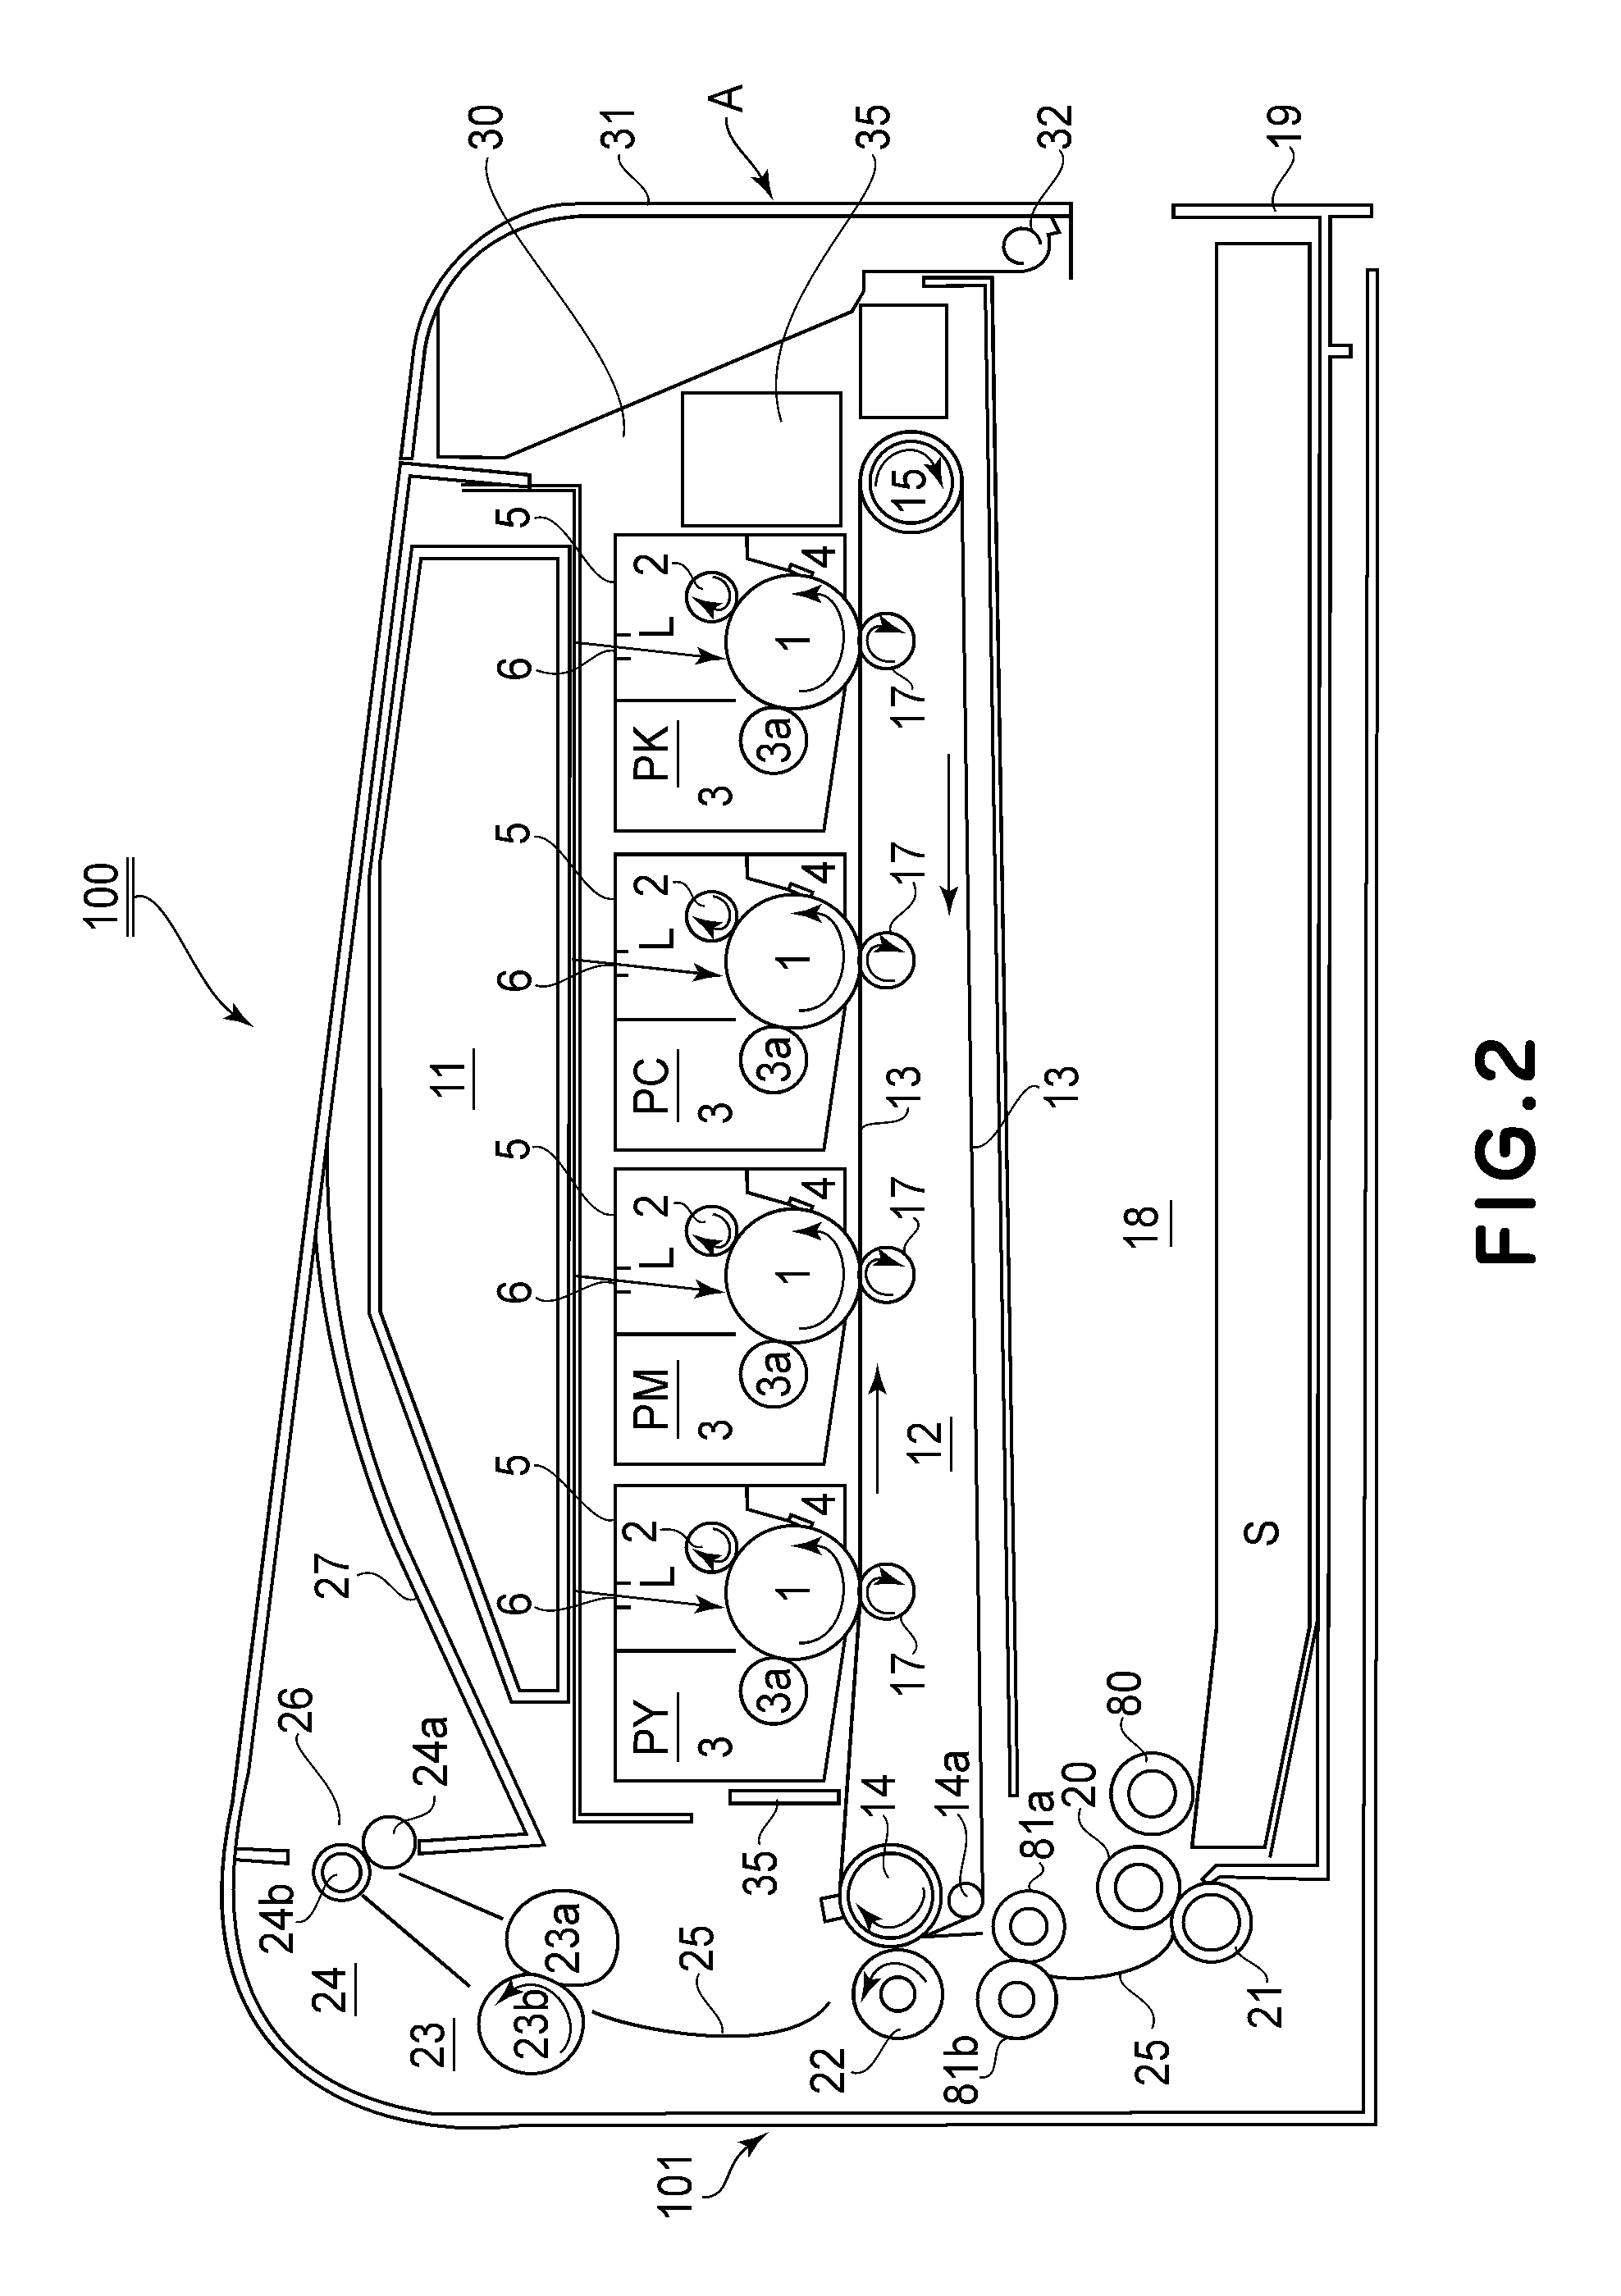 Image forming apparatus with movable cartridge pressing member